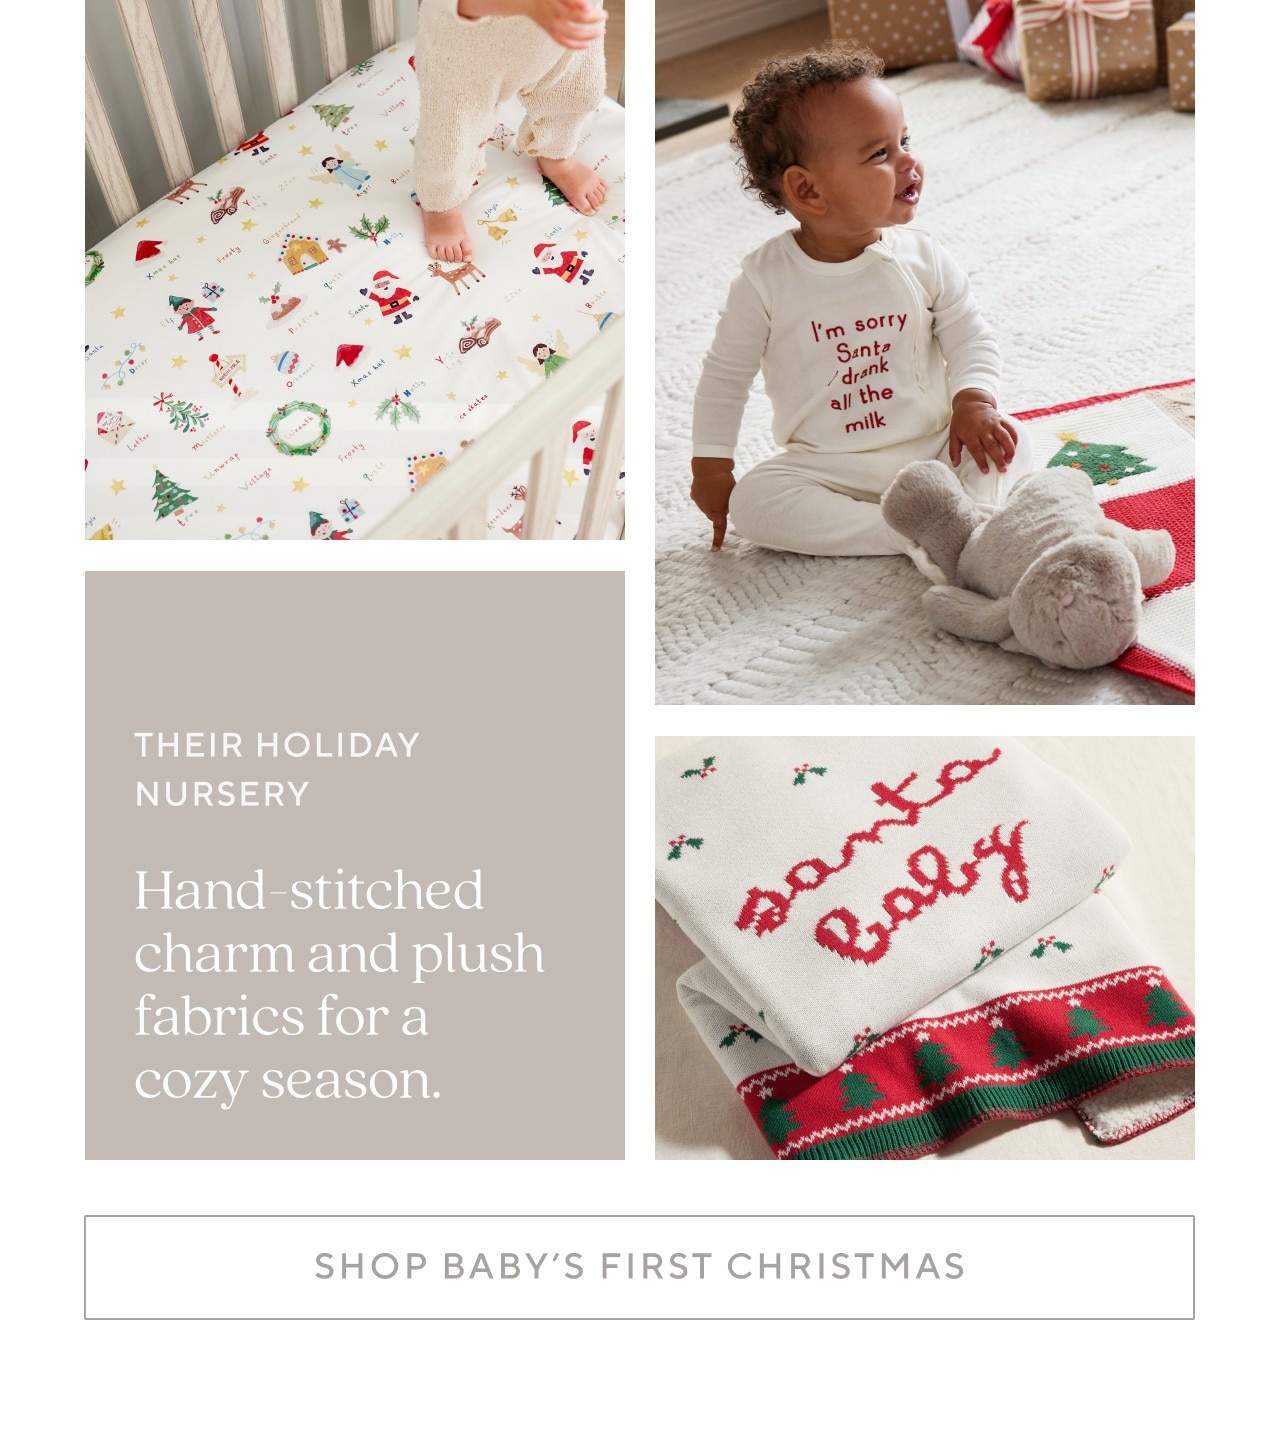 SHOP THE HOLIDAY NURSERY COLLECTION